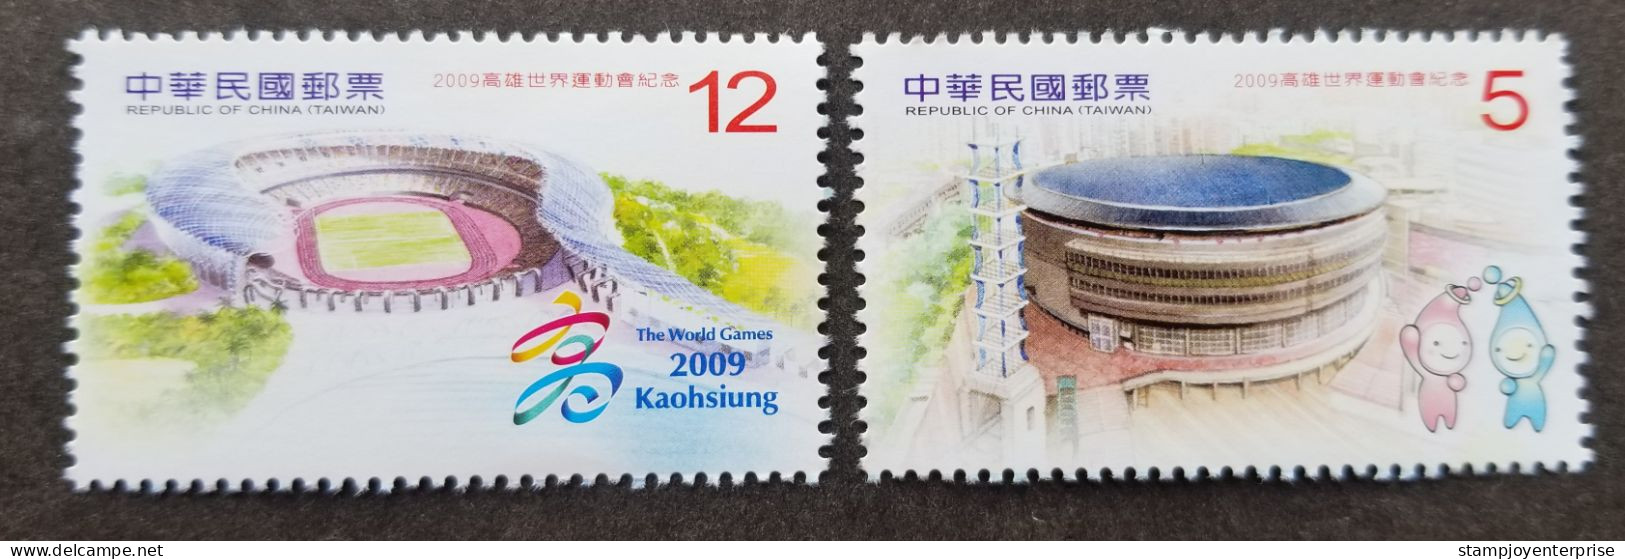 Taiwan World Games Kaohsiung 2009 Sports Stadium Tower City (stamp) MNH - Unused Stamps